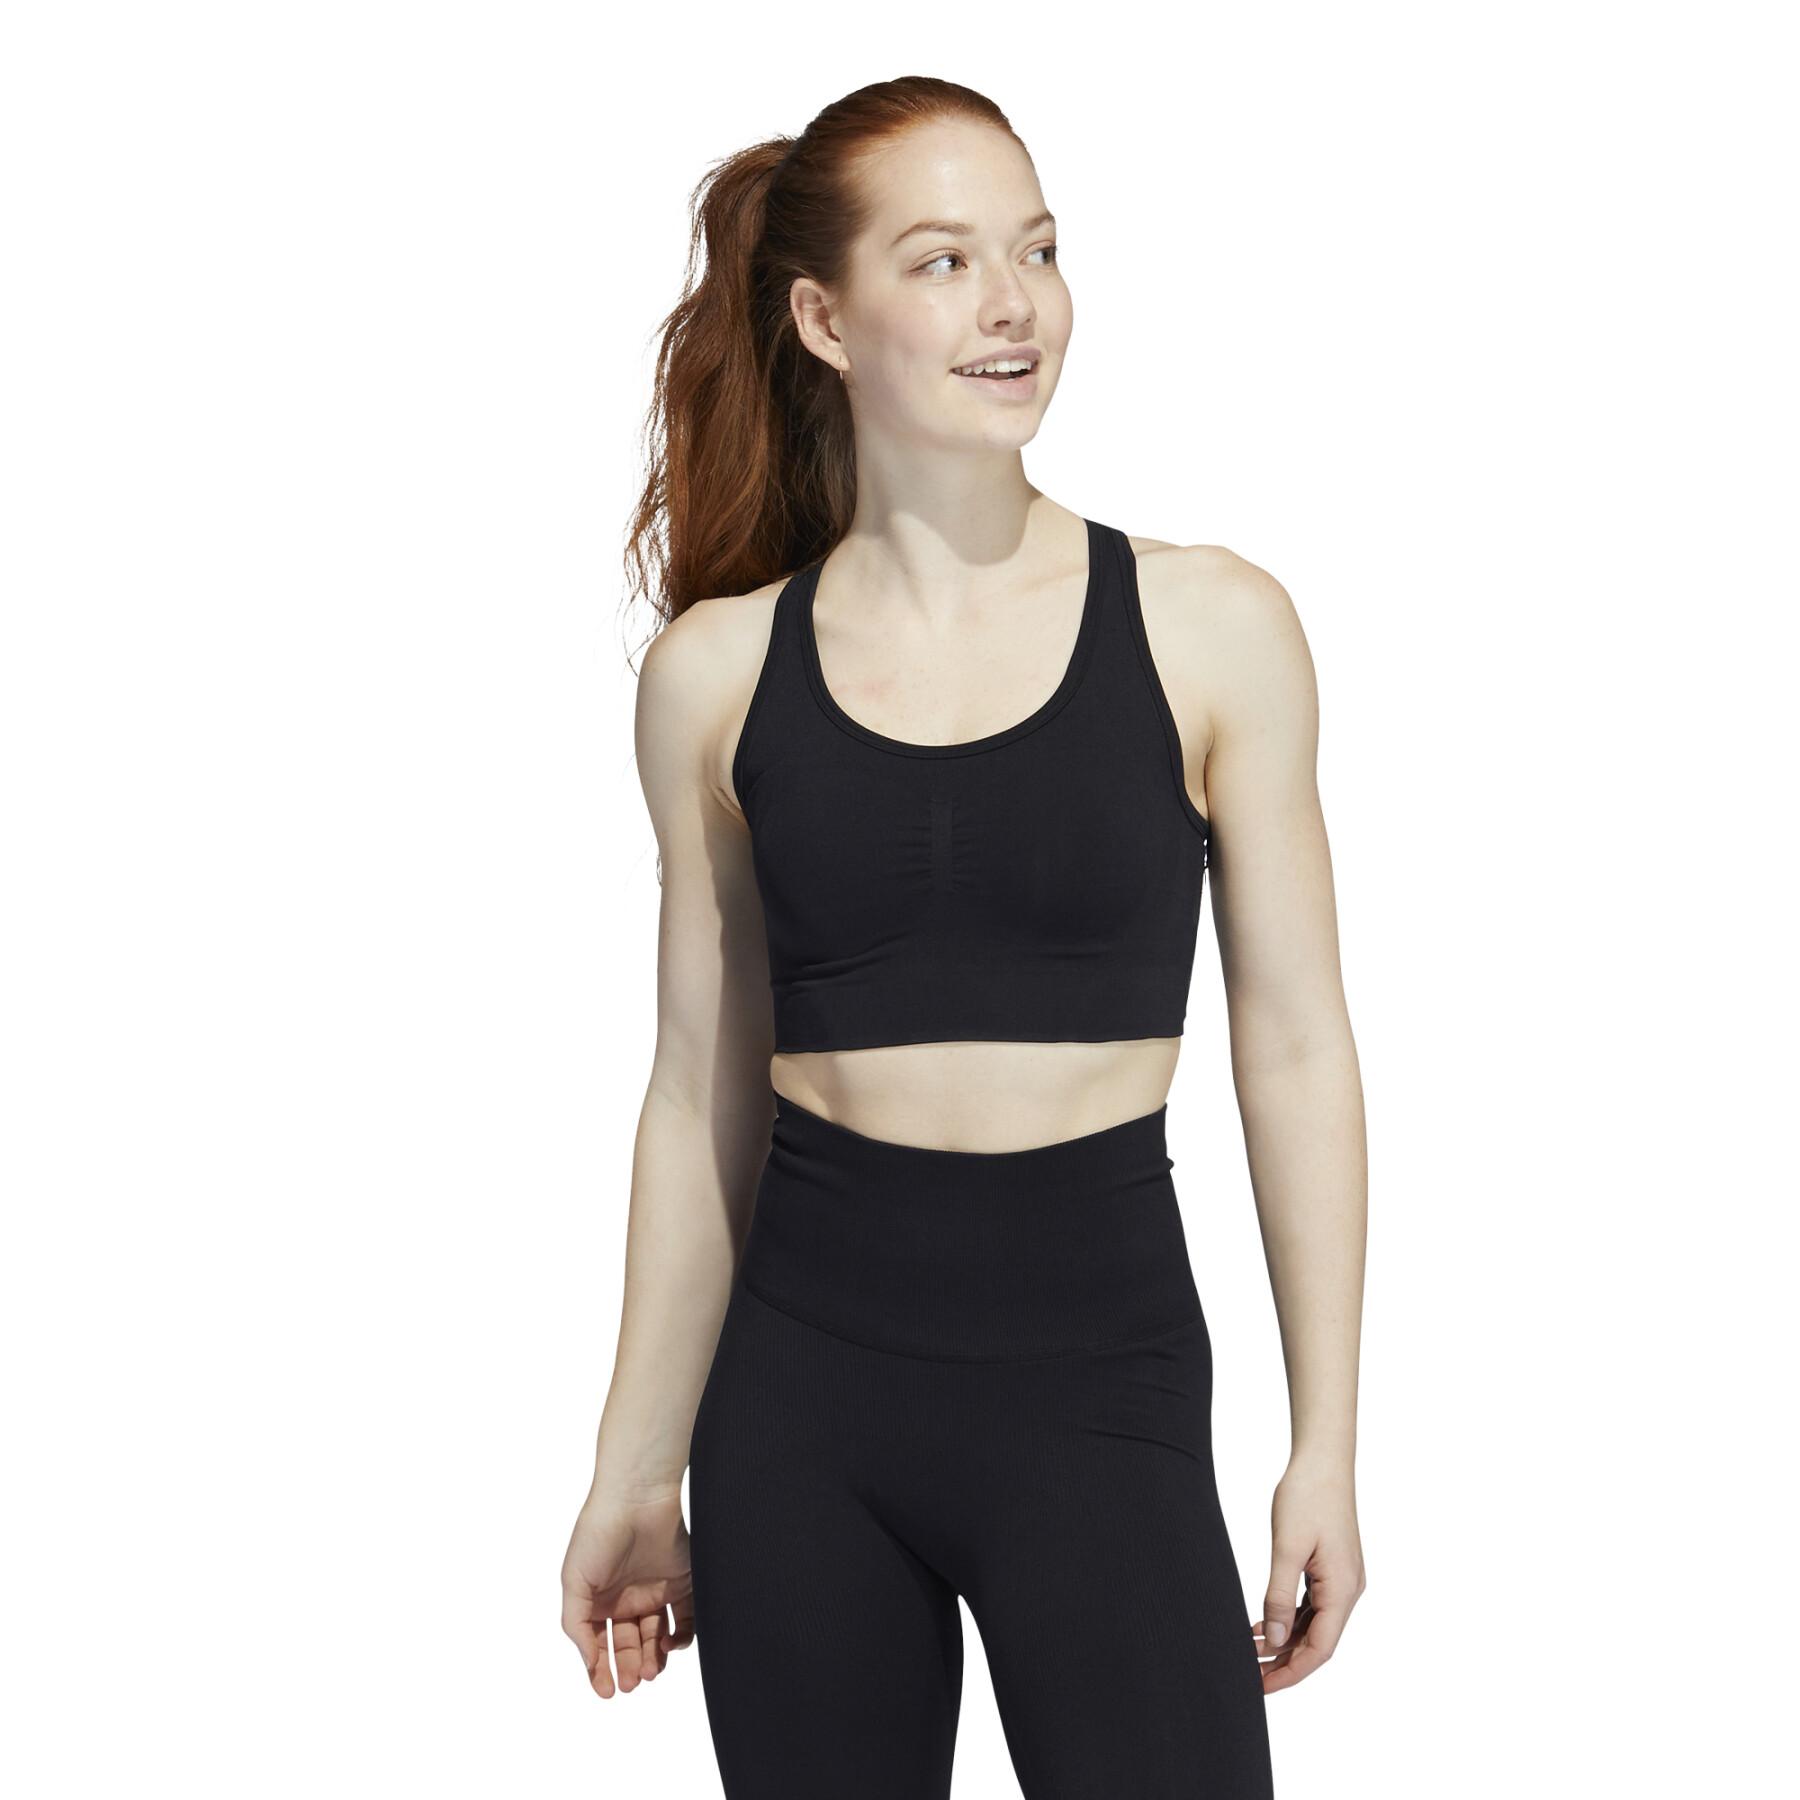 Women's bra adidas formotion sculpt - Bras - The Heights - Womens Clothing